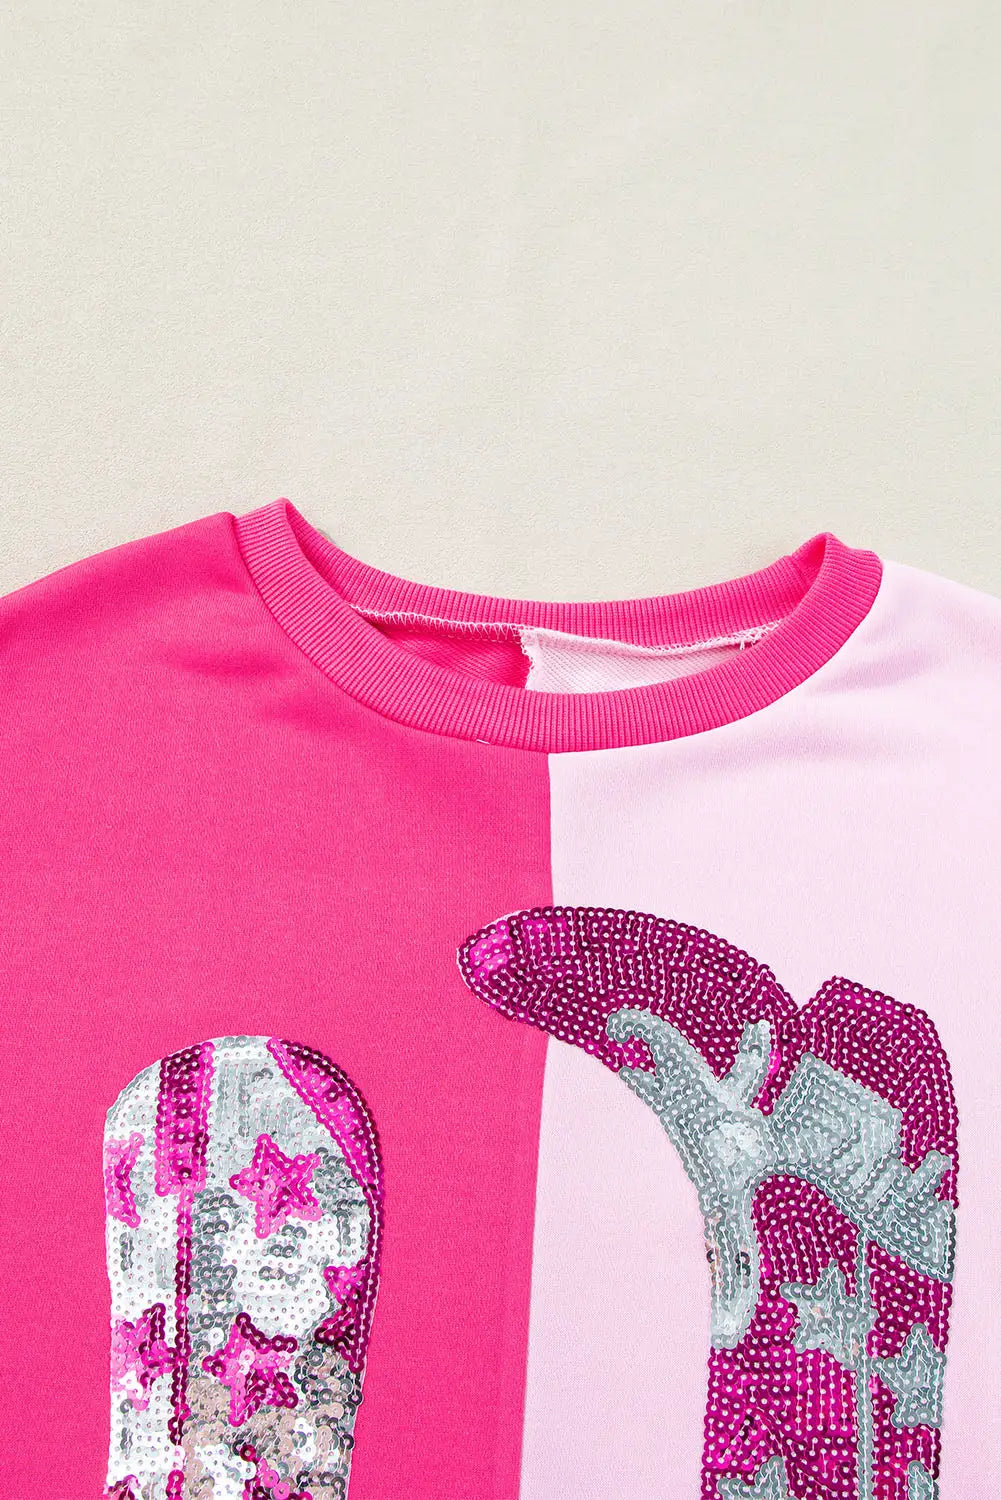 Pink color block sequined cowgirl boots graphic sweatshirt - tops